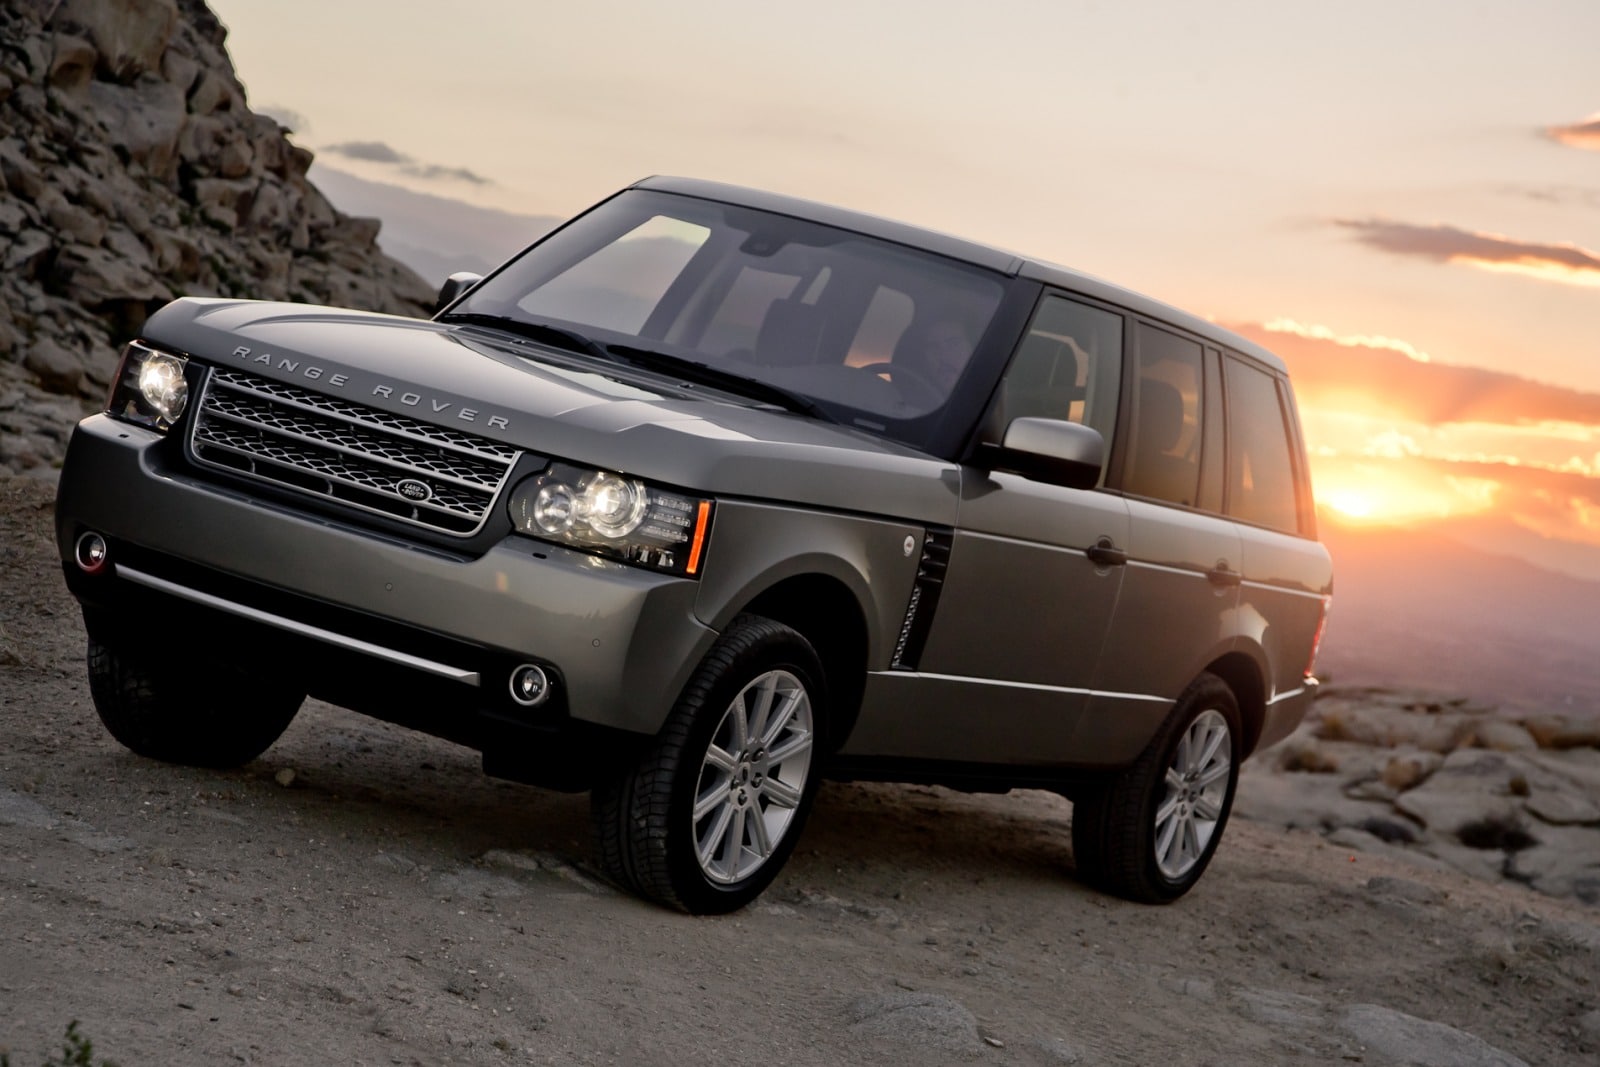 2012 Land Rover Range Rover Review & Ratings | Edmunds